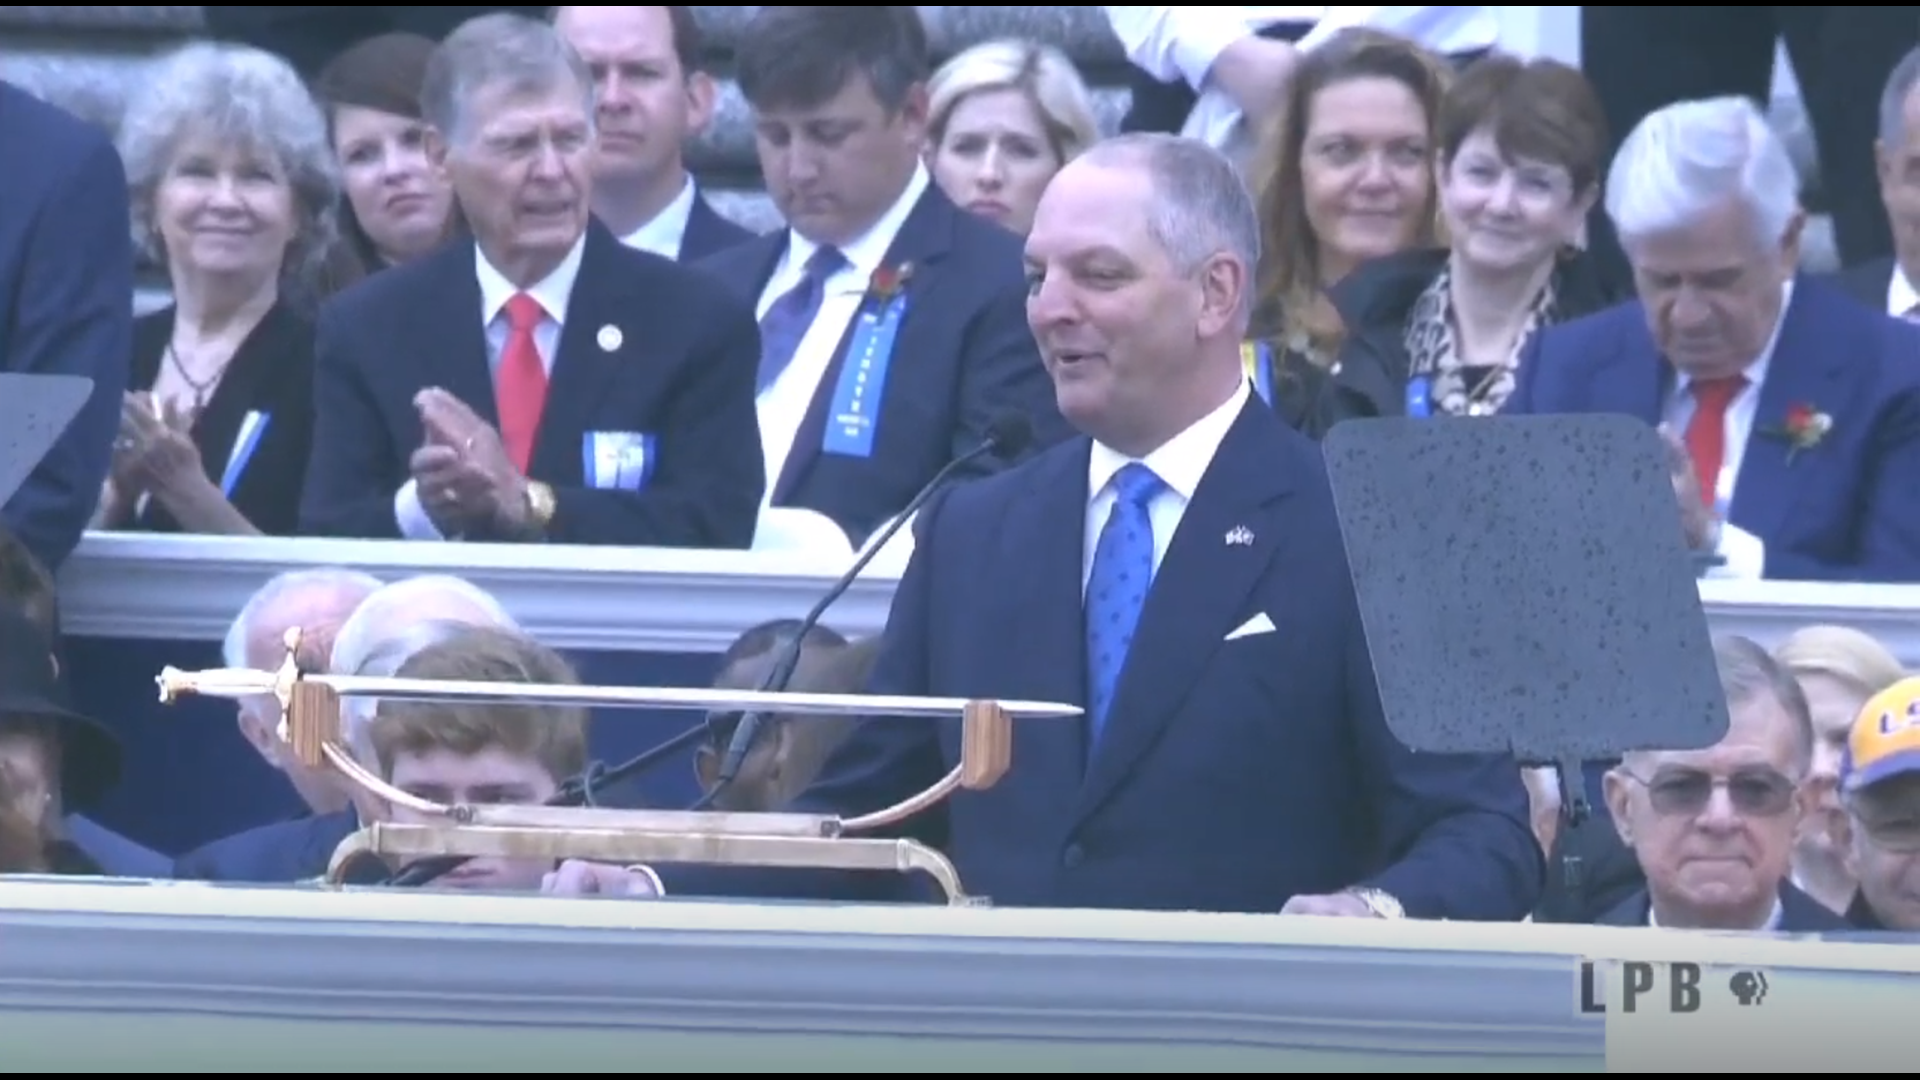 Gov. John Bel Edwards outlined his second-term priorities during an inauguration speech. Video courtesy of LPB.